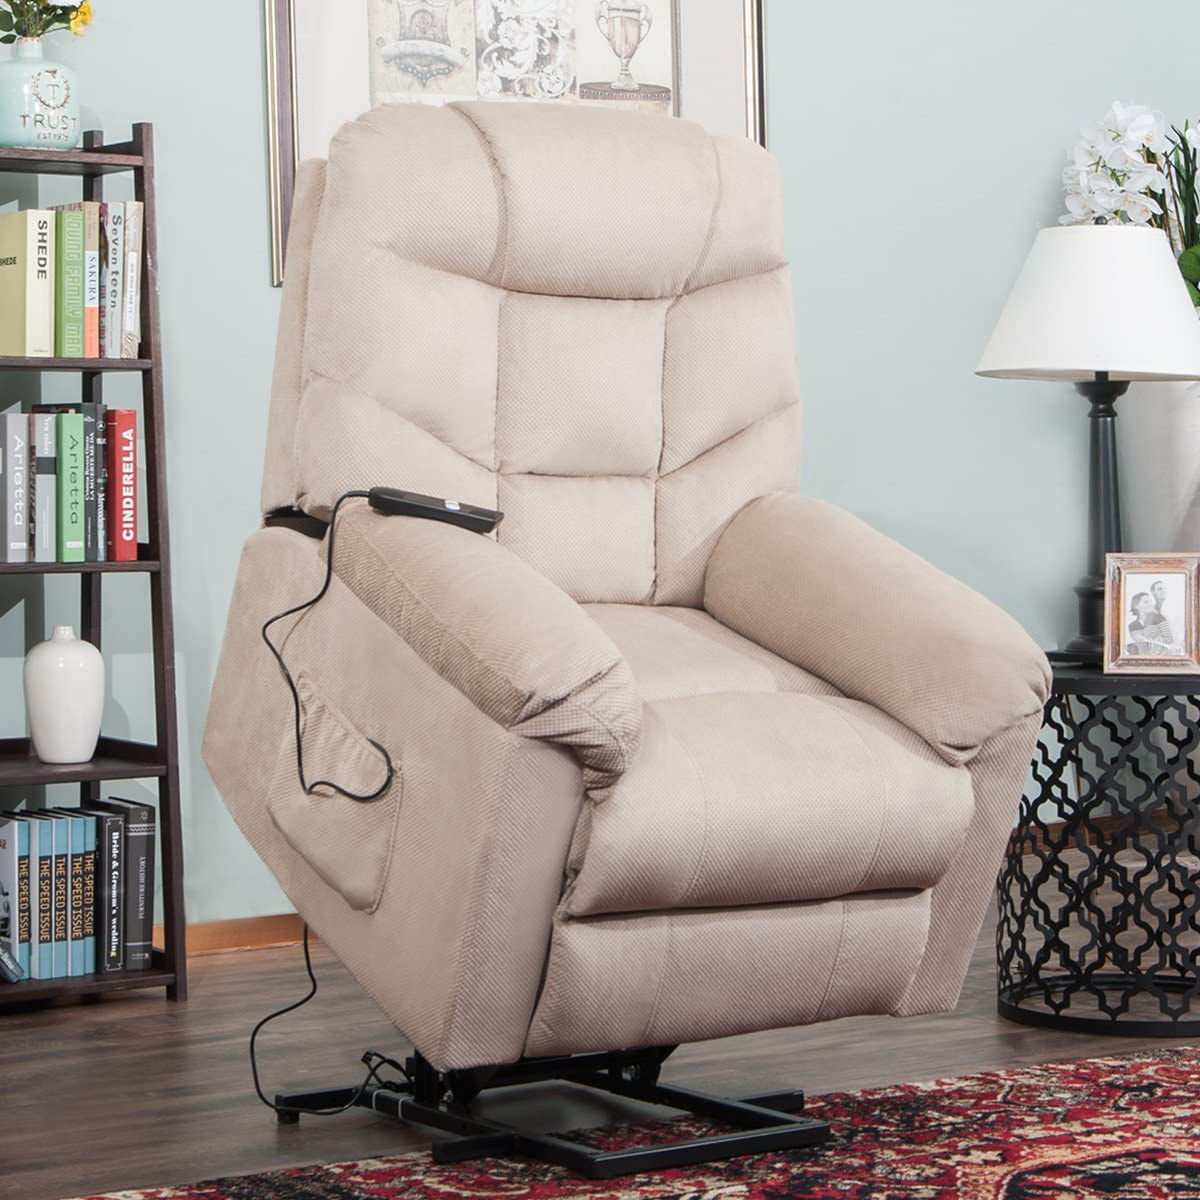 Unique Lift Chairs For Elderly Sams Club for Simple Design